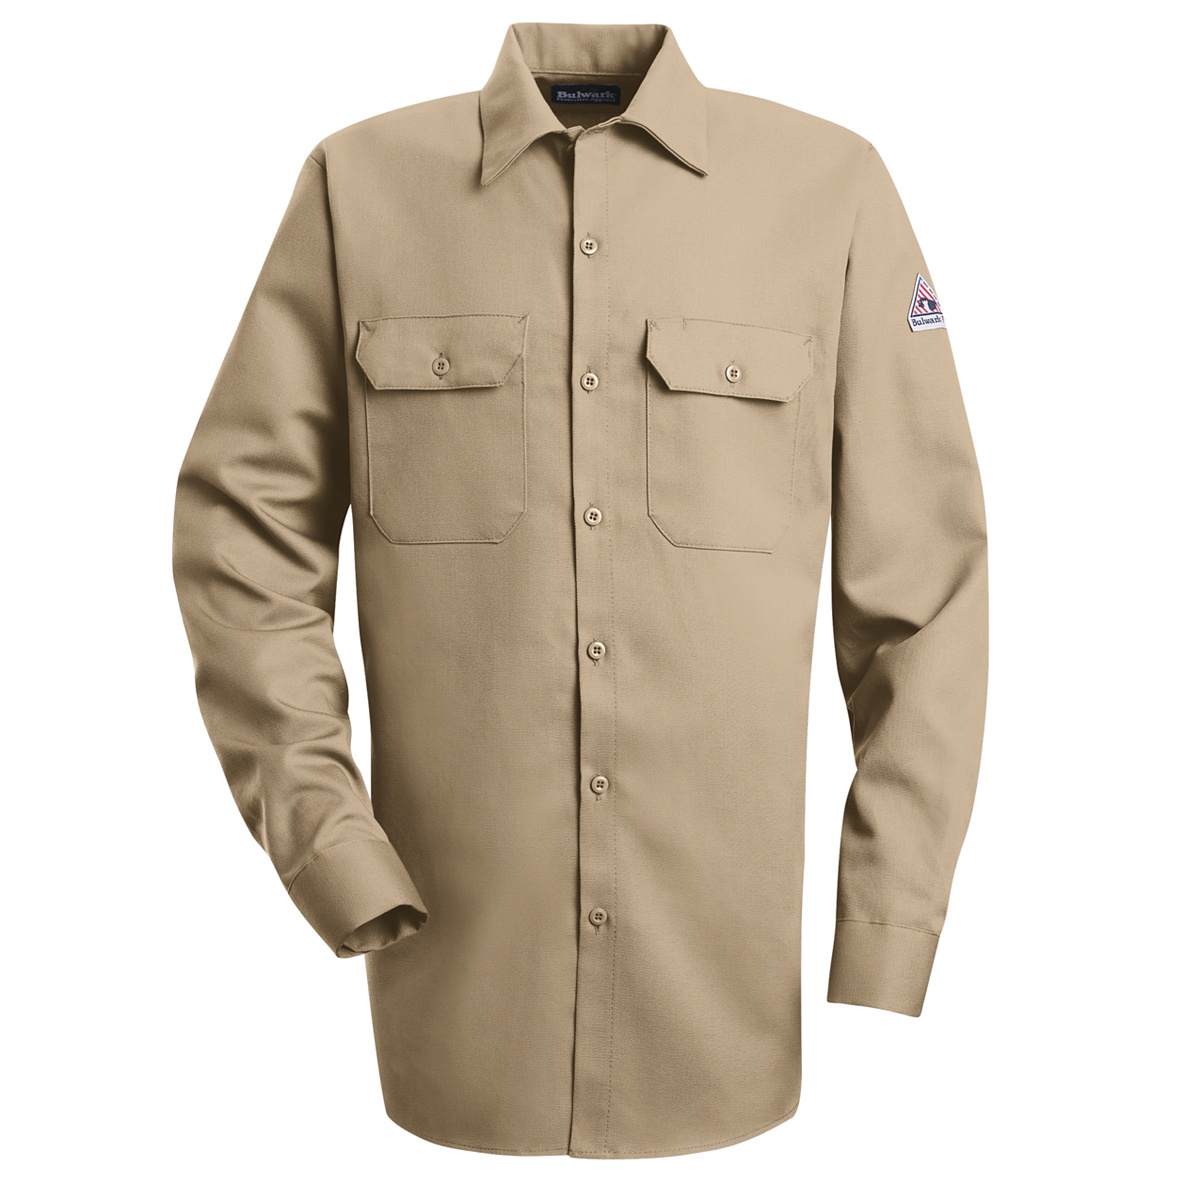 Bulwark® Large Tall Khaki Westex Ultrasoft®/Cotton/Nylon Flame Resistant Work Shirt With Button Front Closure